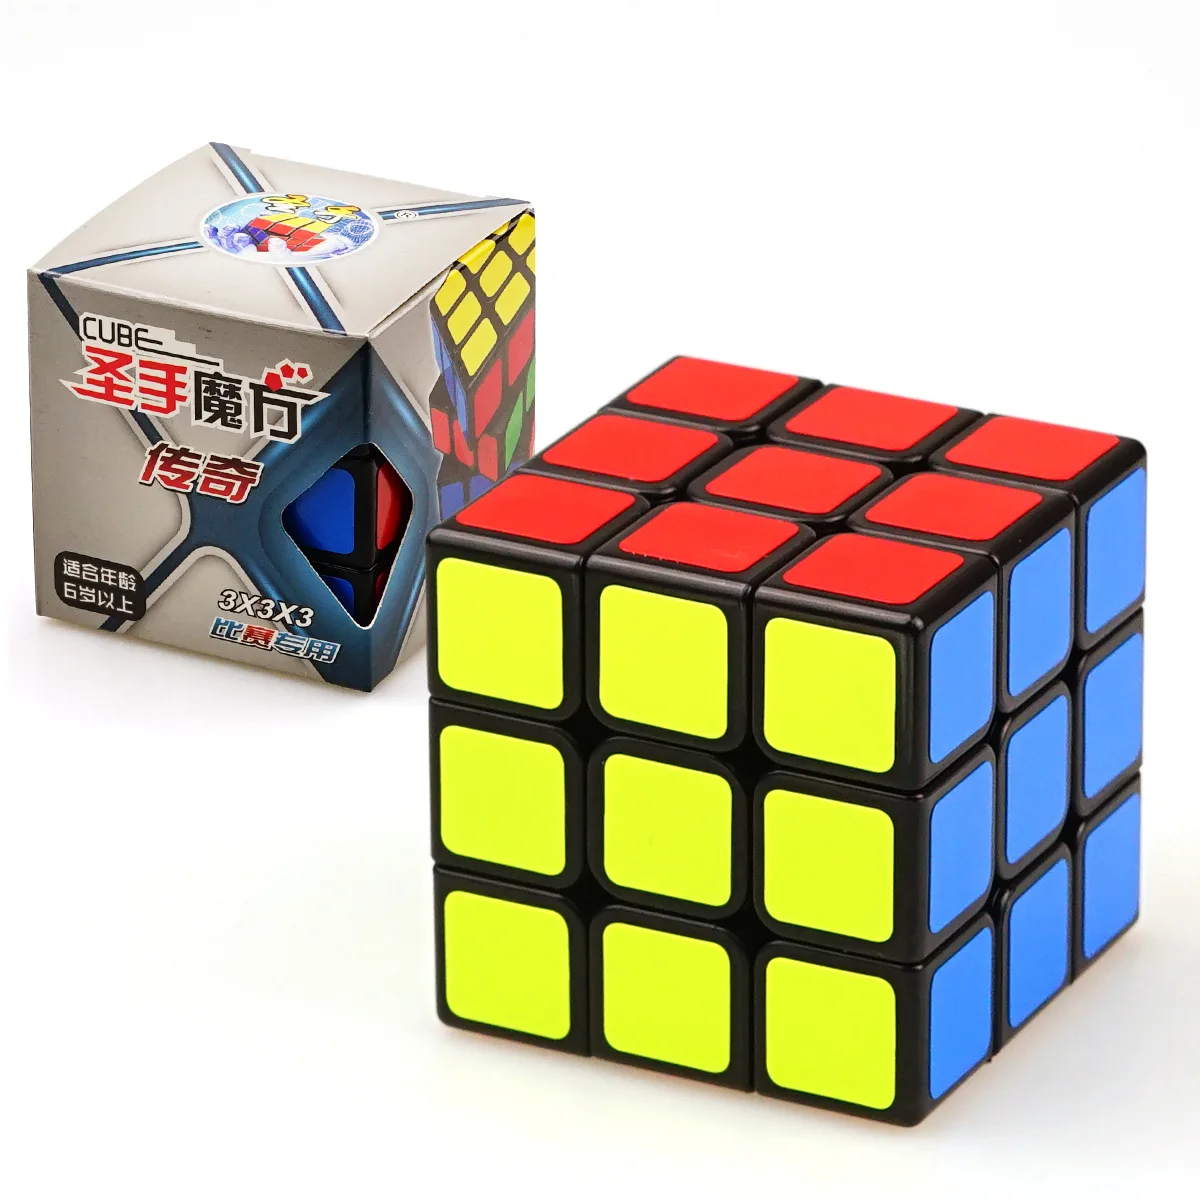 

3X3X3 Speed Magic Cube Fidget Toys Antistress Cube 3x3 Cubo Magico Puzzle Cube Hungarian Toys For Children Restless